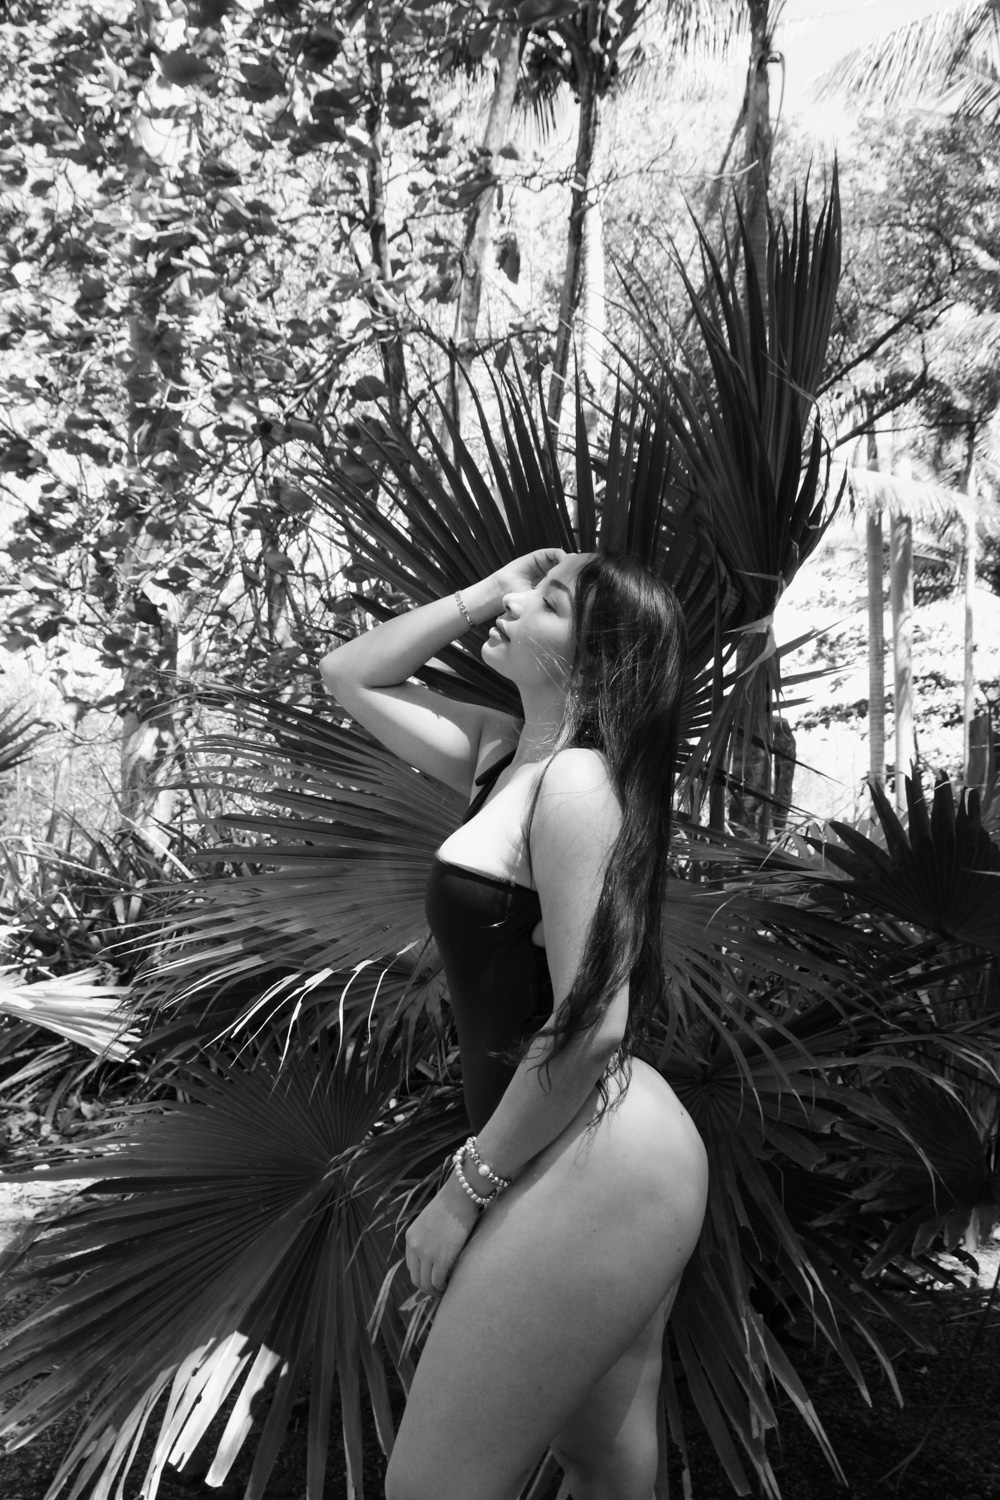 Black and white portrait photo of a young woman with long hair, in a swimsuit, holding a hand on a side of her face. In front of a plant.